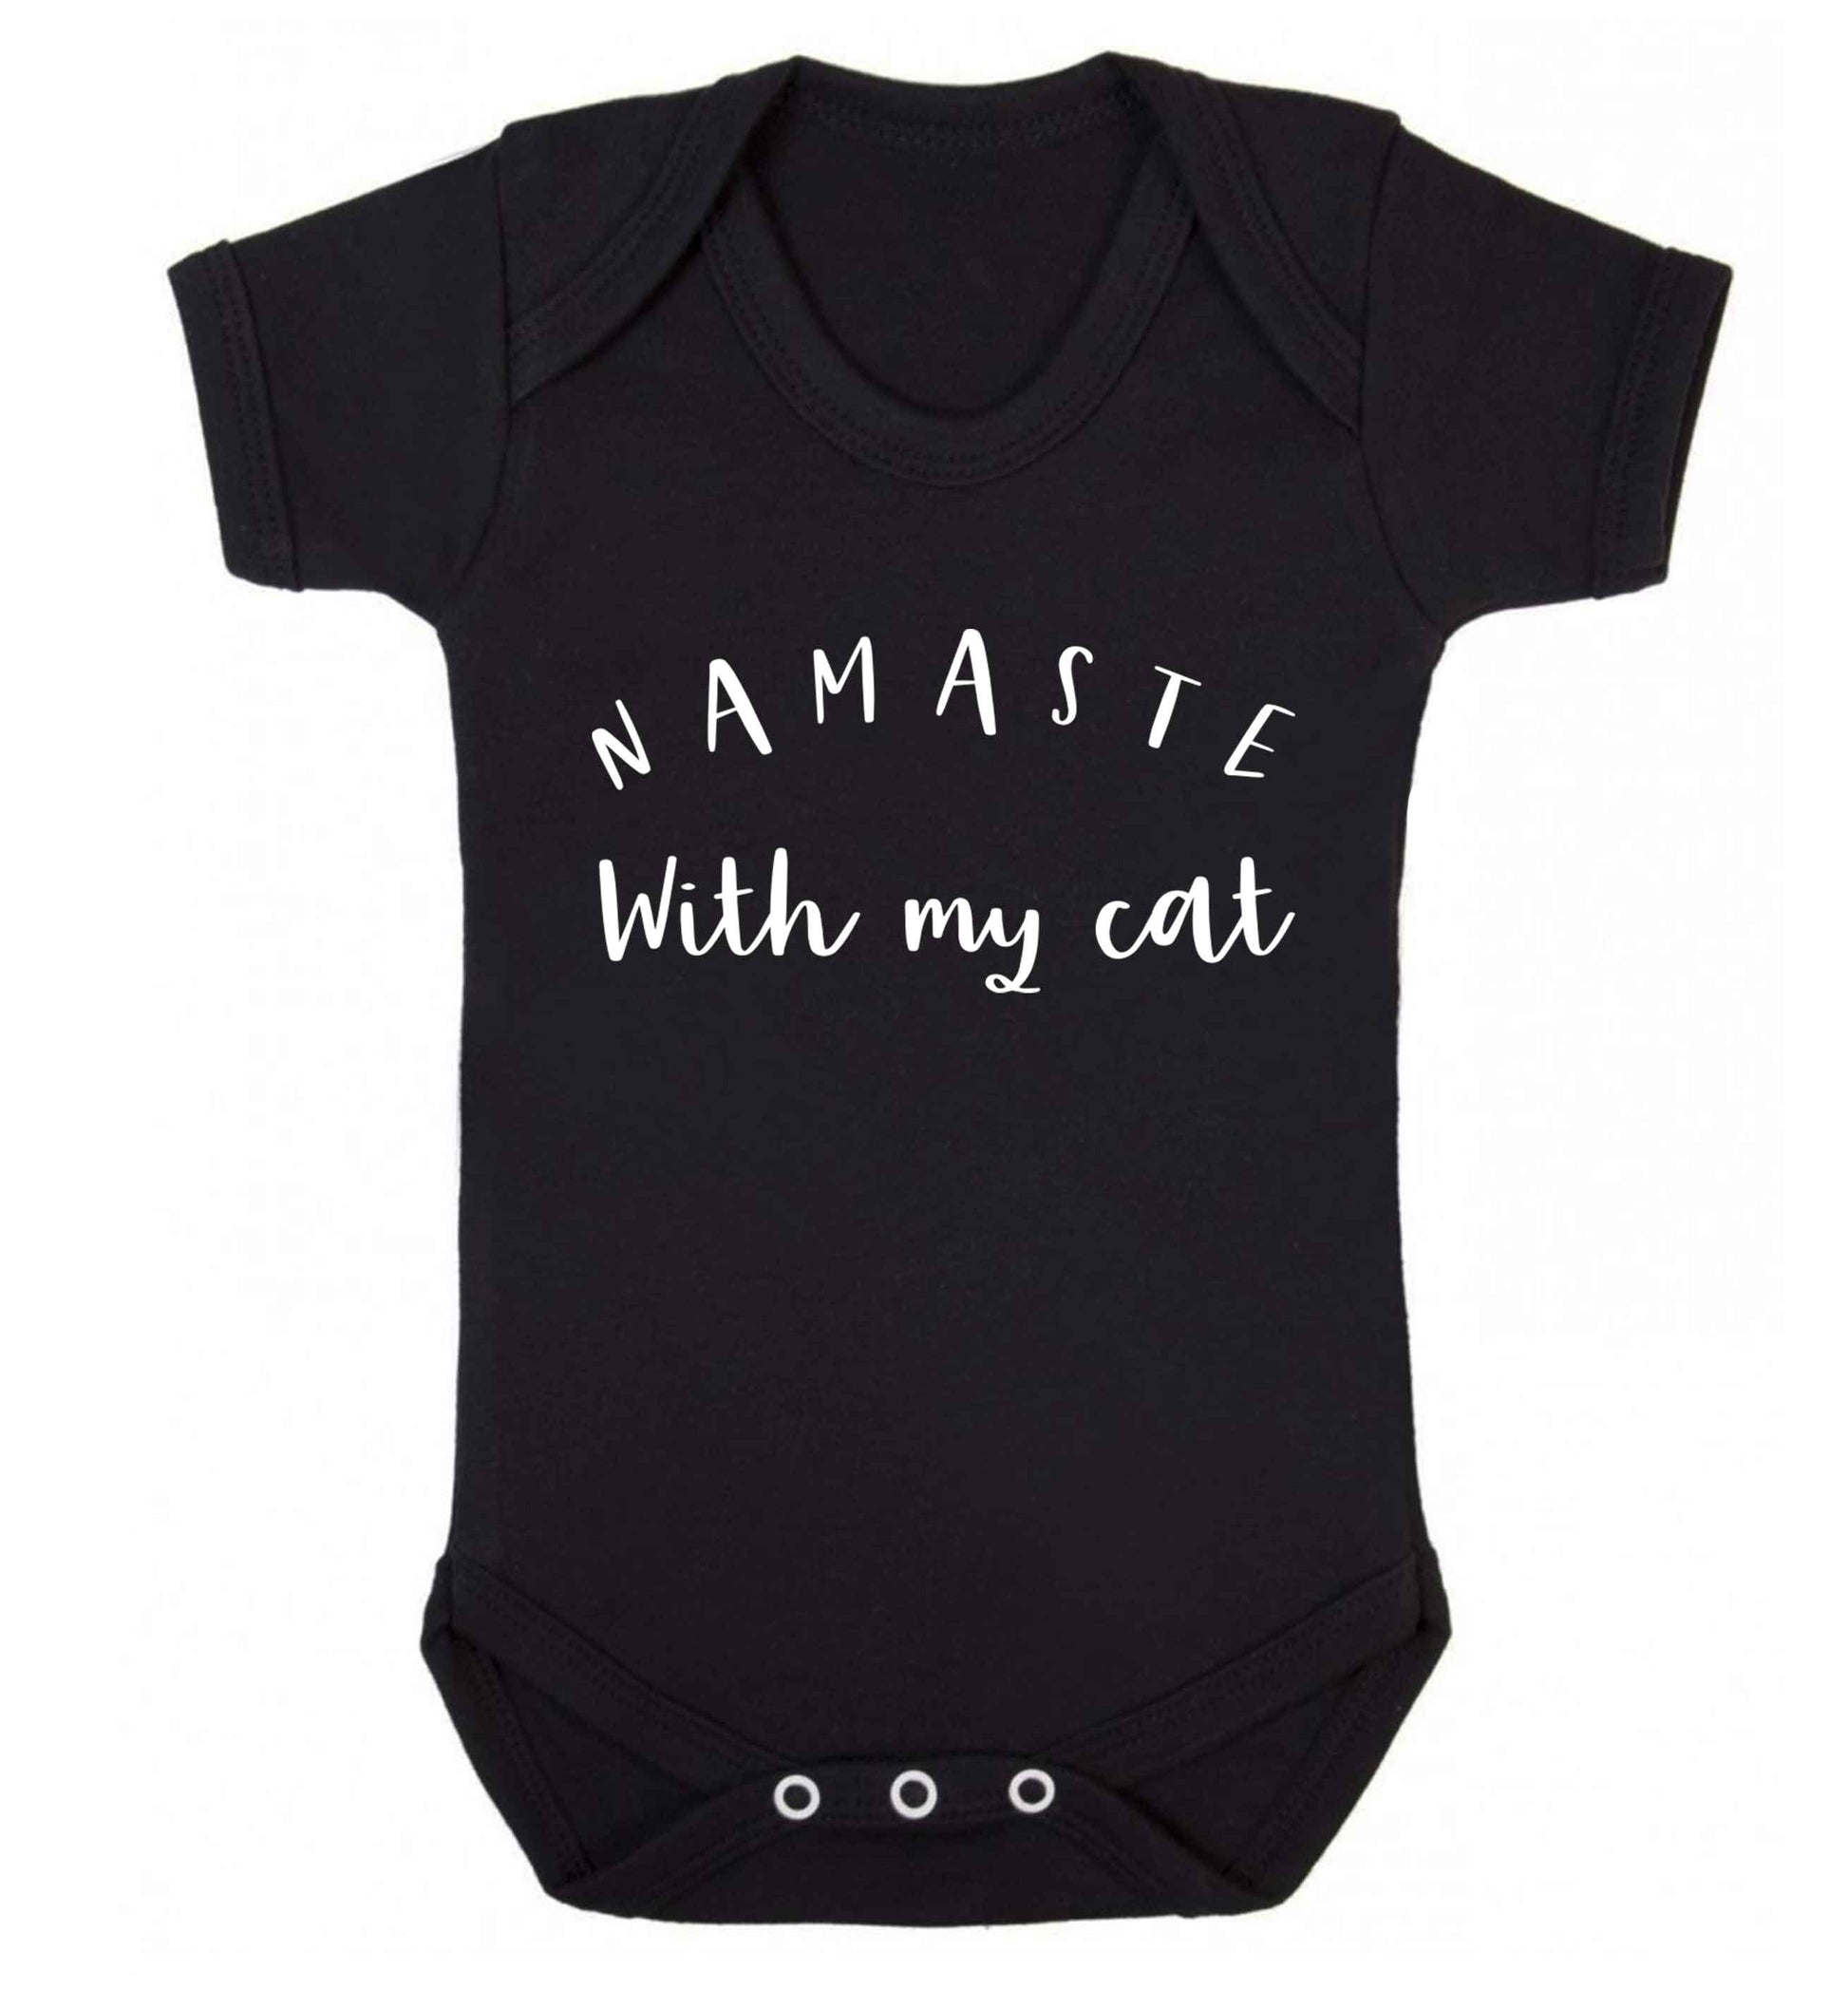 Namaste with my cat Baby Vest black 18-24 months